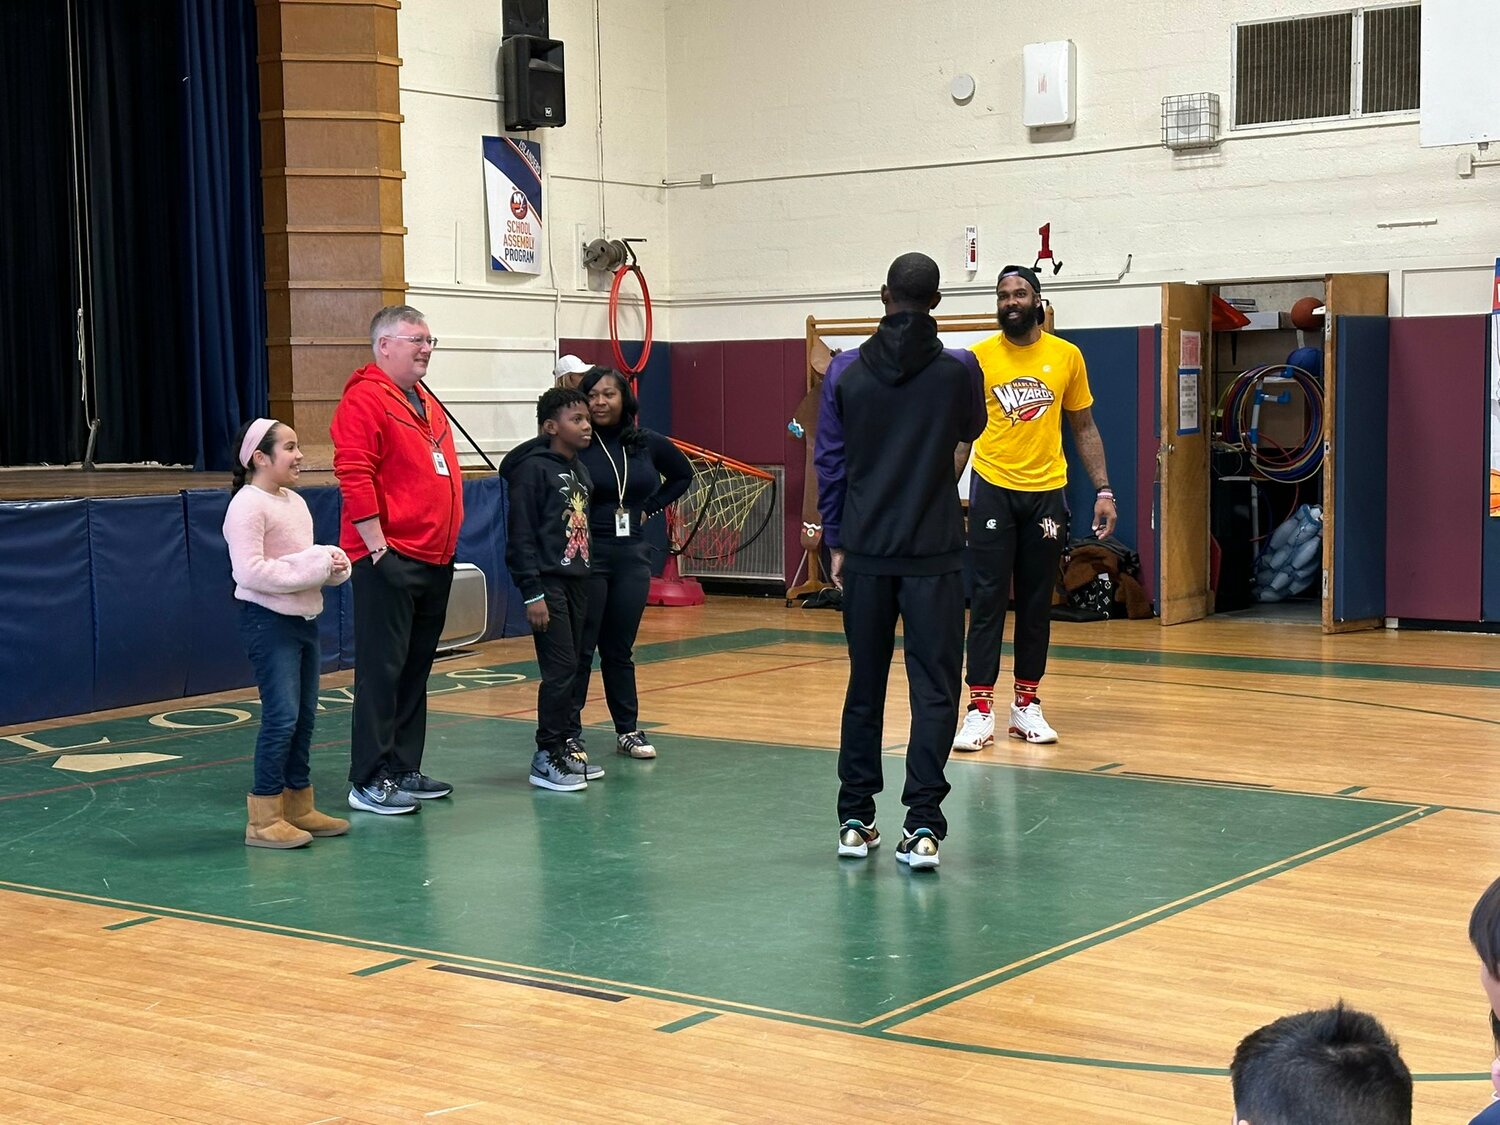 Howell Road Elementary School students participating in the WizFit Challenge with the Harlem Wizards.